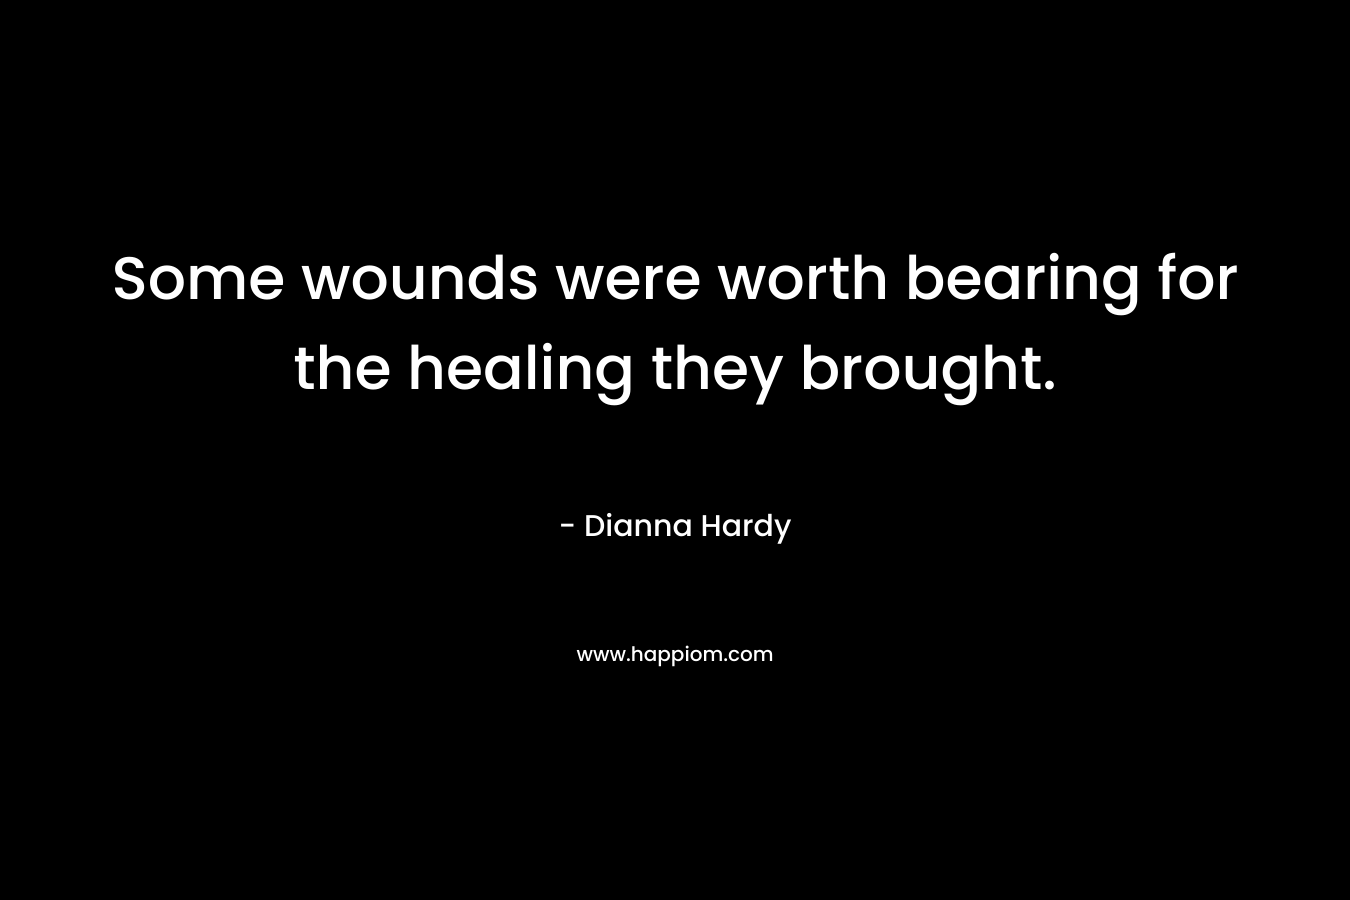 Some wounds were worth bearing for the healing they brought.